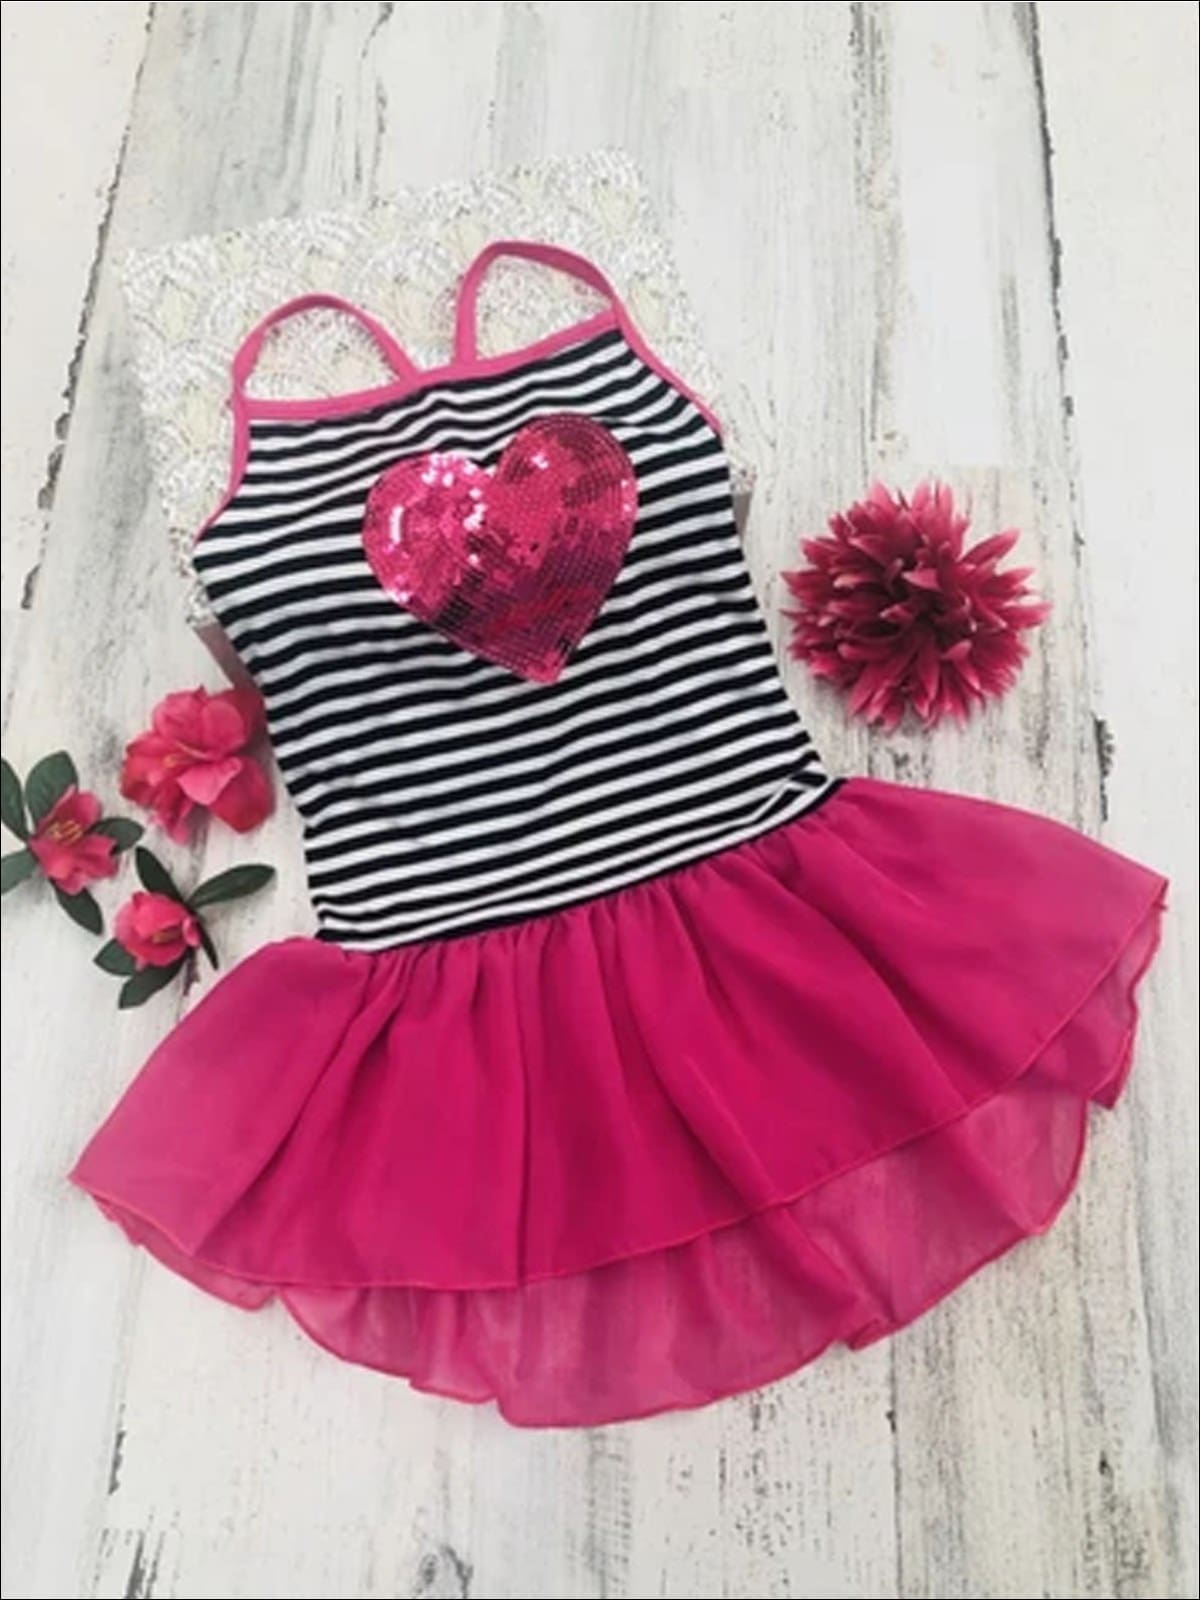 Girls Black & White Striped Ruffled Hi-Lo Tunic with Sequin Heart Applique - Black/White/Pink / 2T/3T - Girls Spring Top